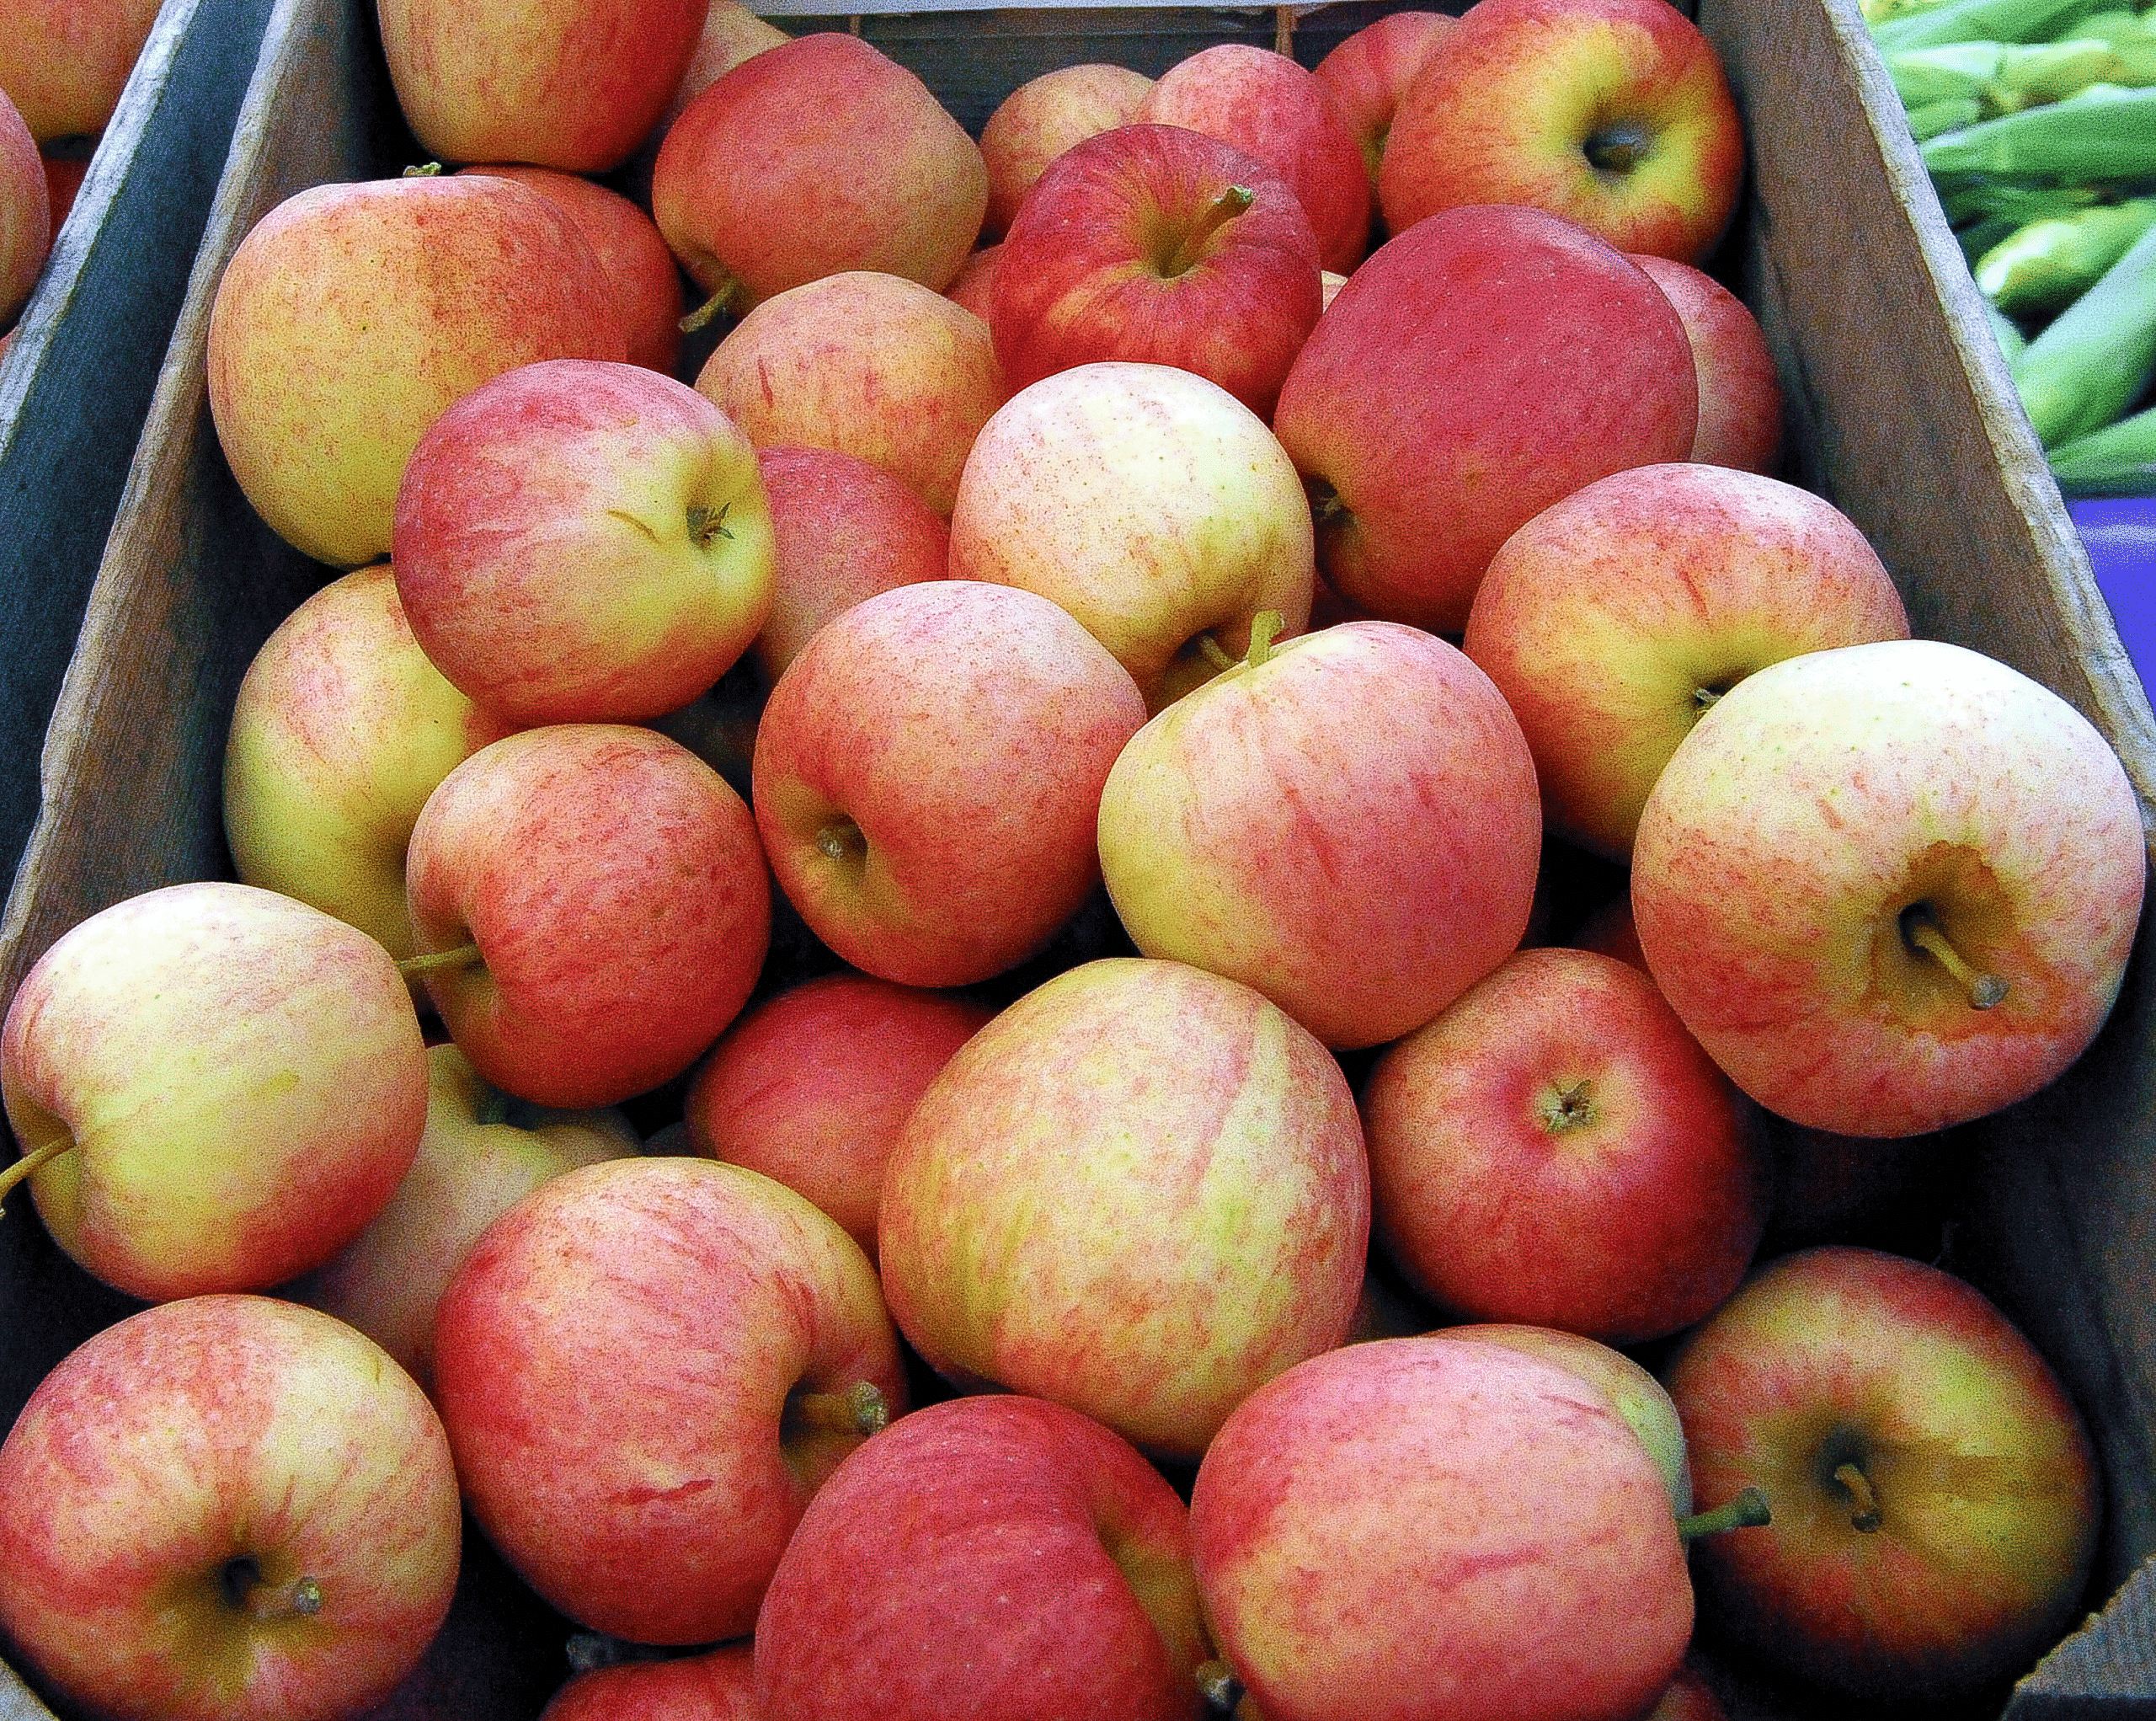 apples for Flat belly and weight loss